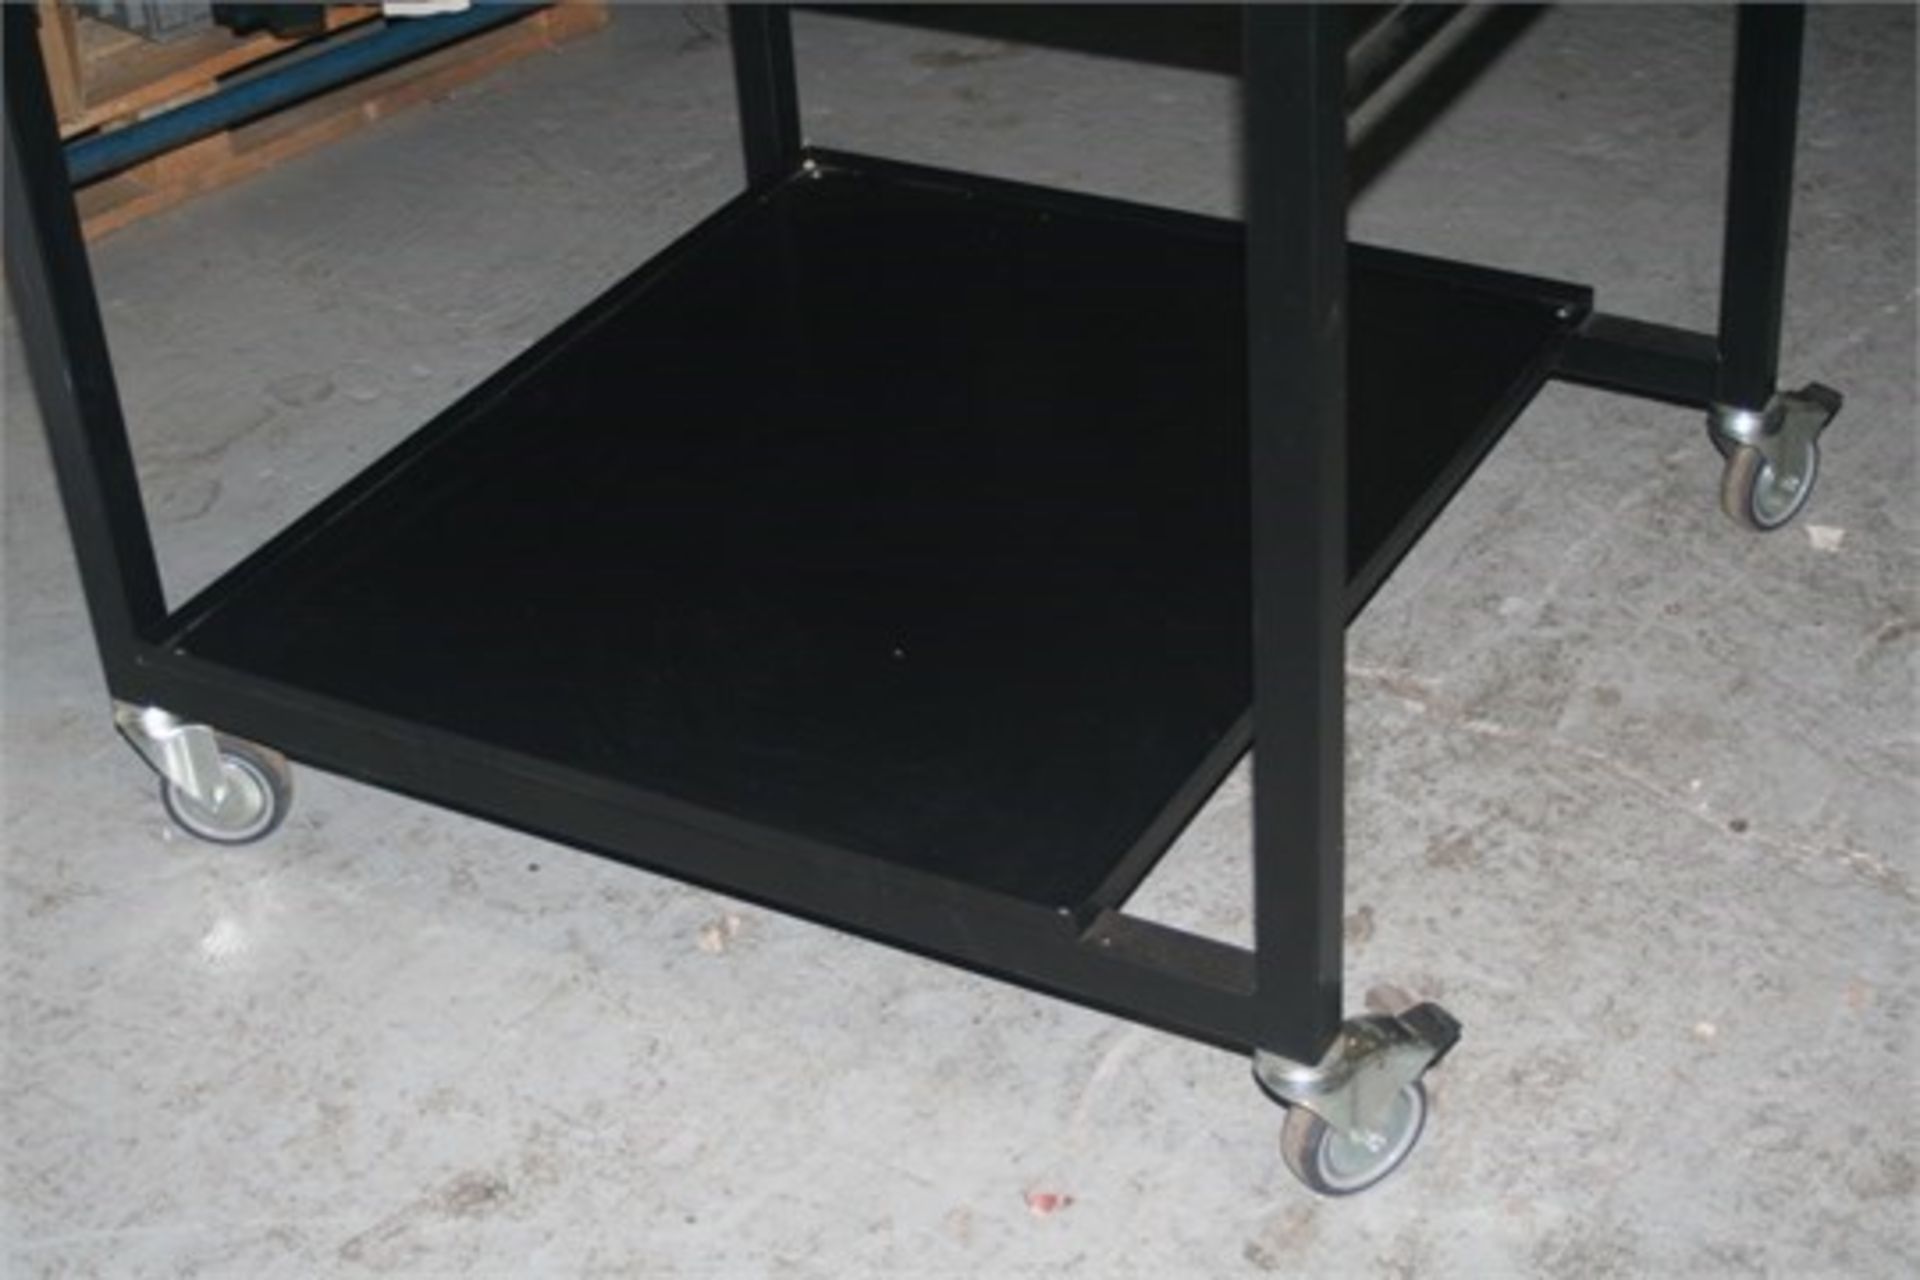 1 x Mobile Work Table - Large Size With Undershelf and Heavy Duty Castor Wheels - Strong Build - Image 7 of 8